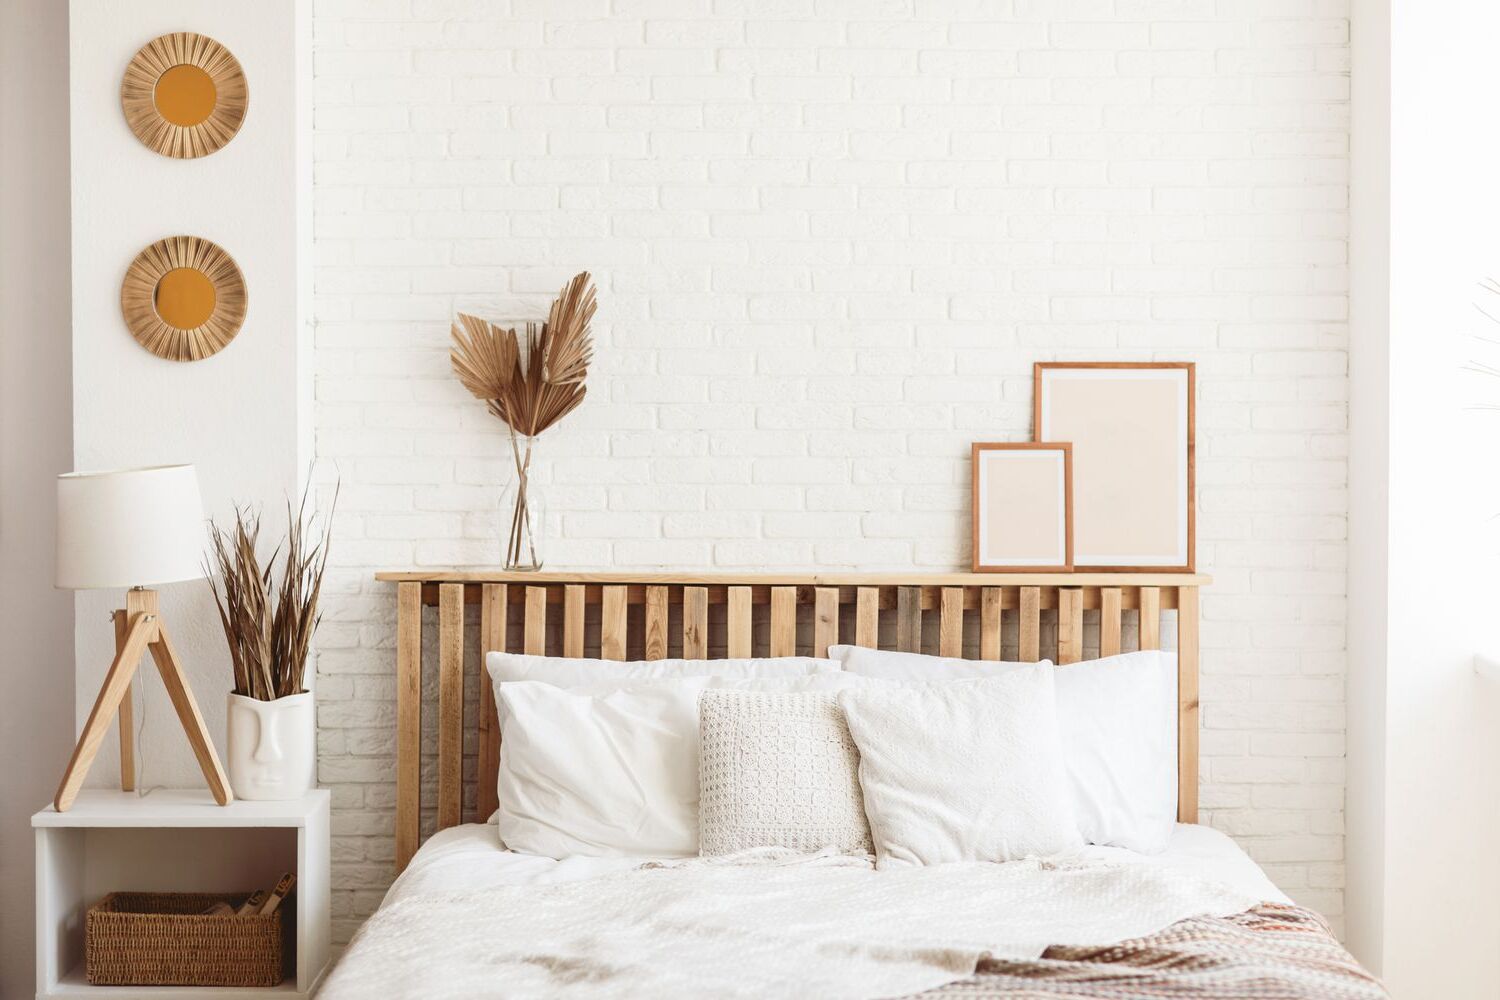 DIY Headboard: Transform Your Bedroom With These Creative Ideas